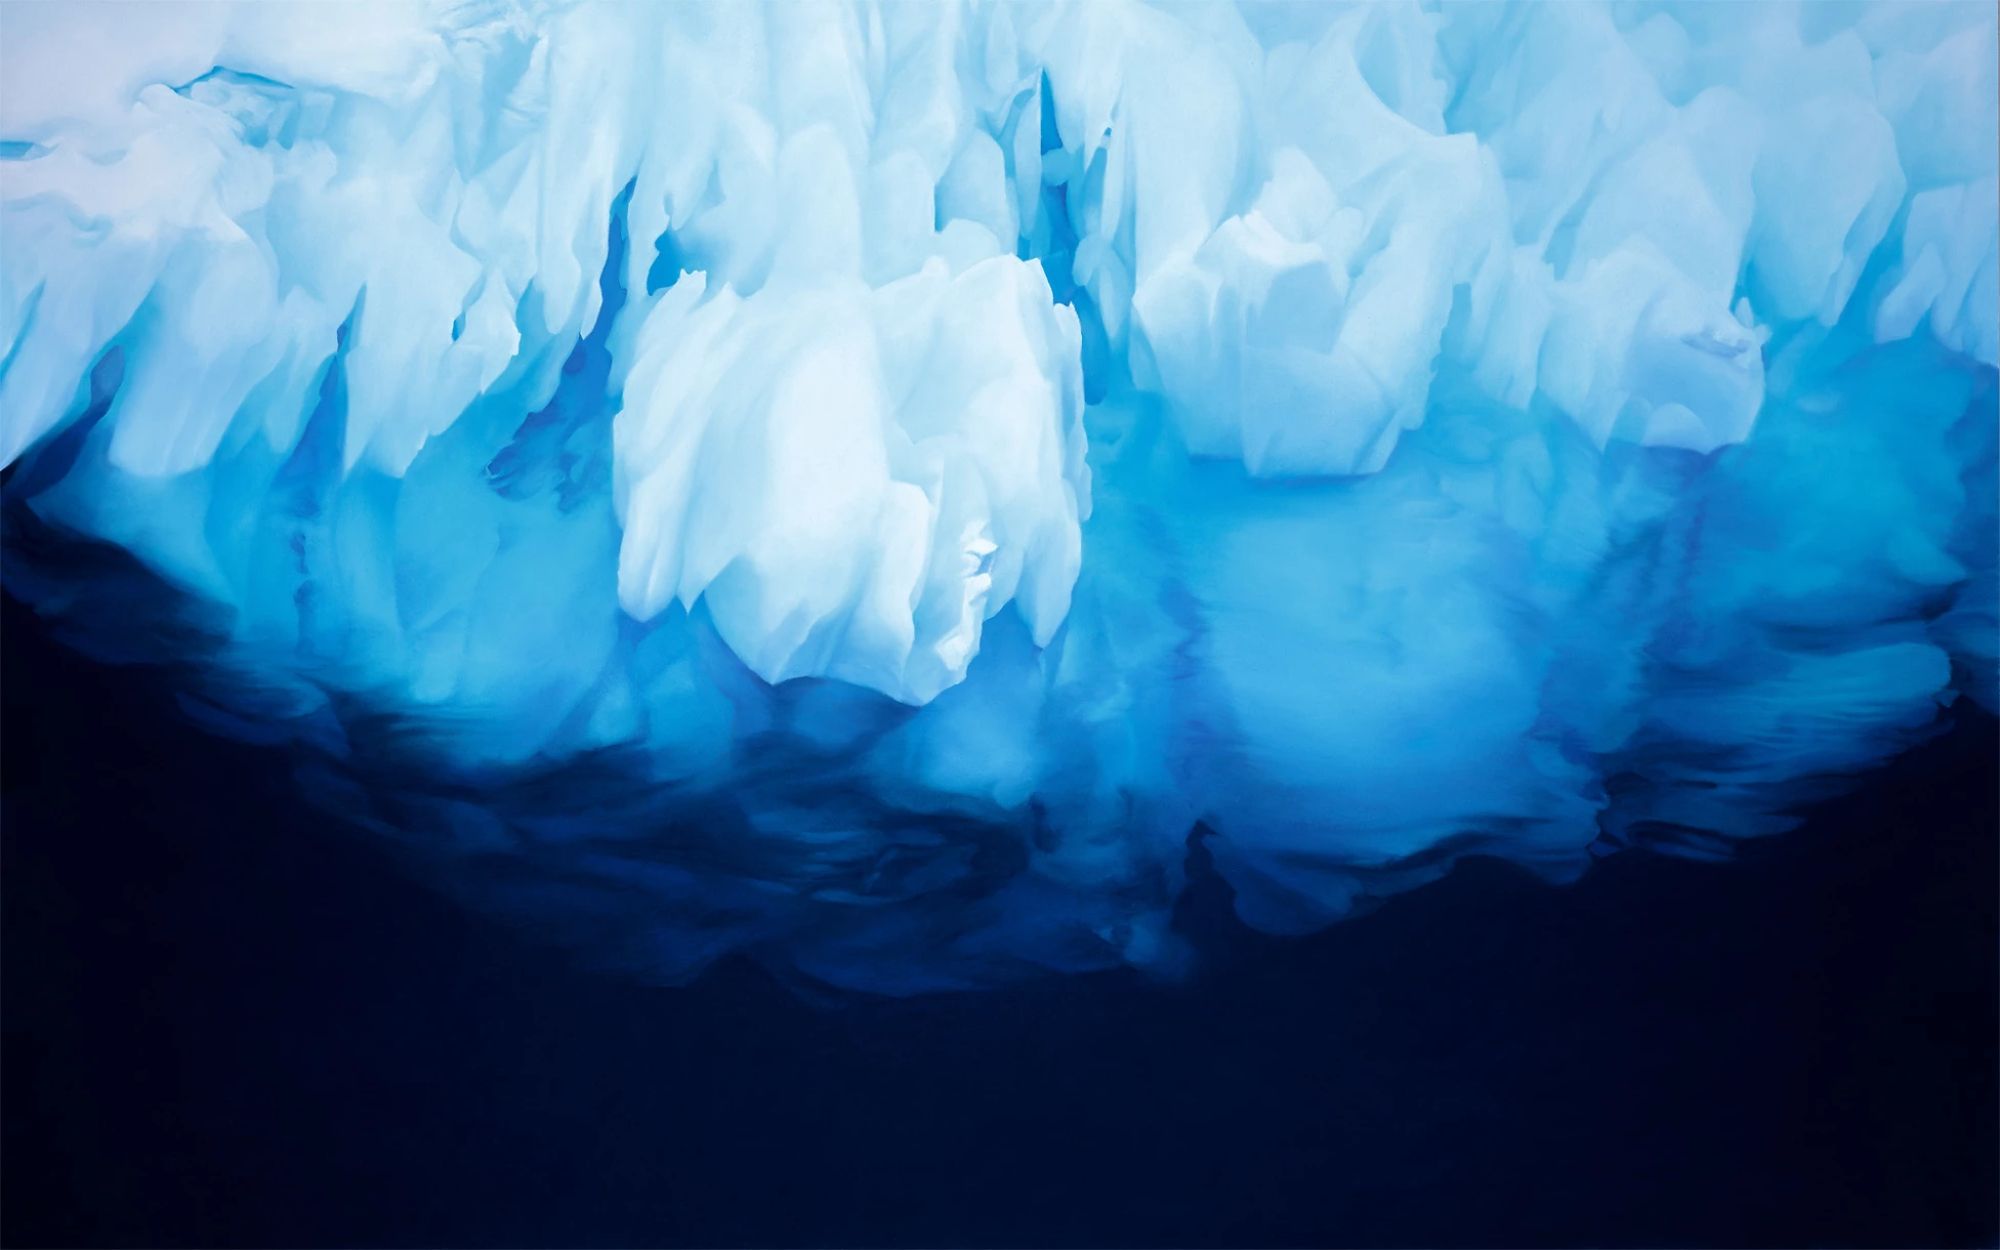 Drawing: A hyper-realistic image of large ice-cap it's gradient of light to dark blue.